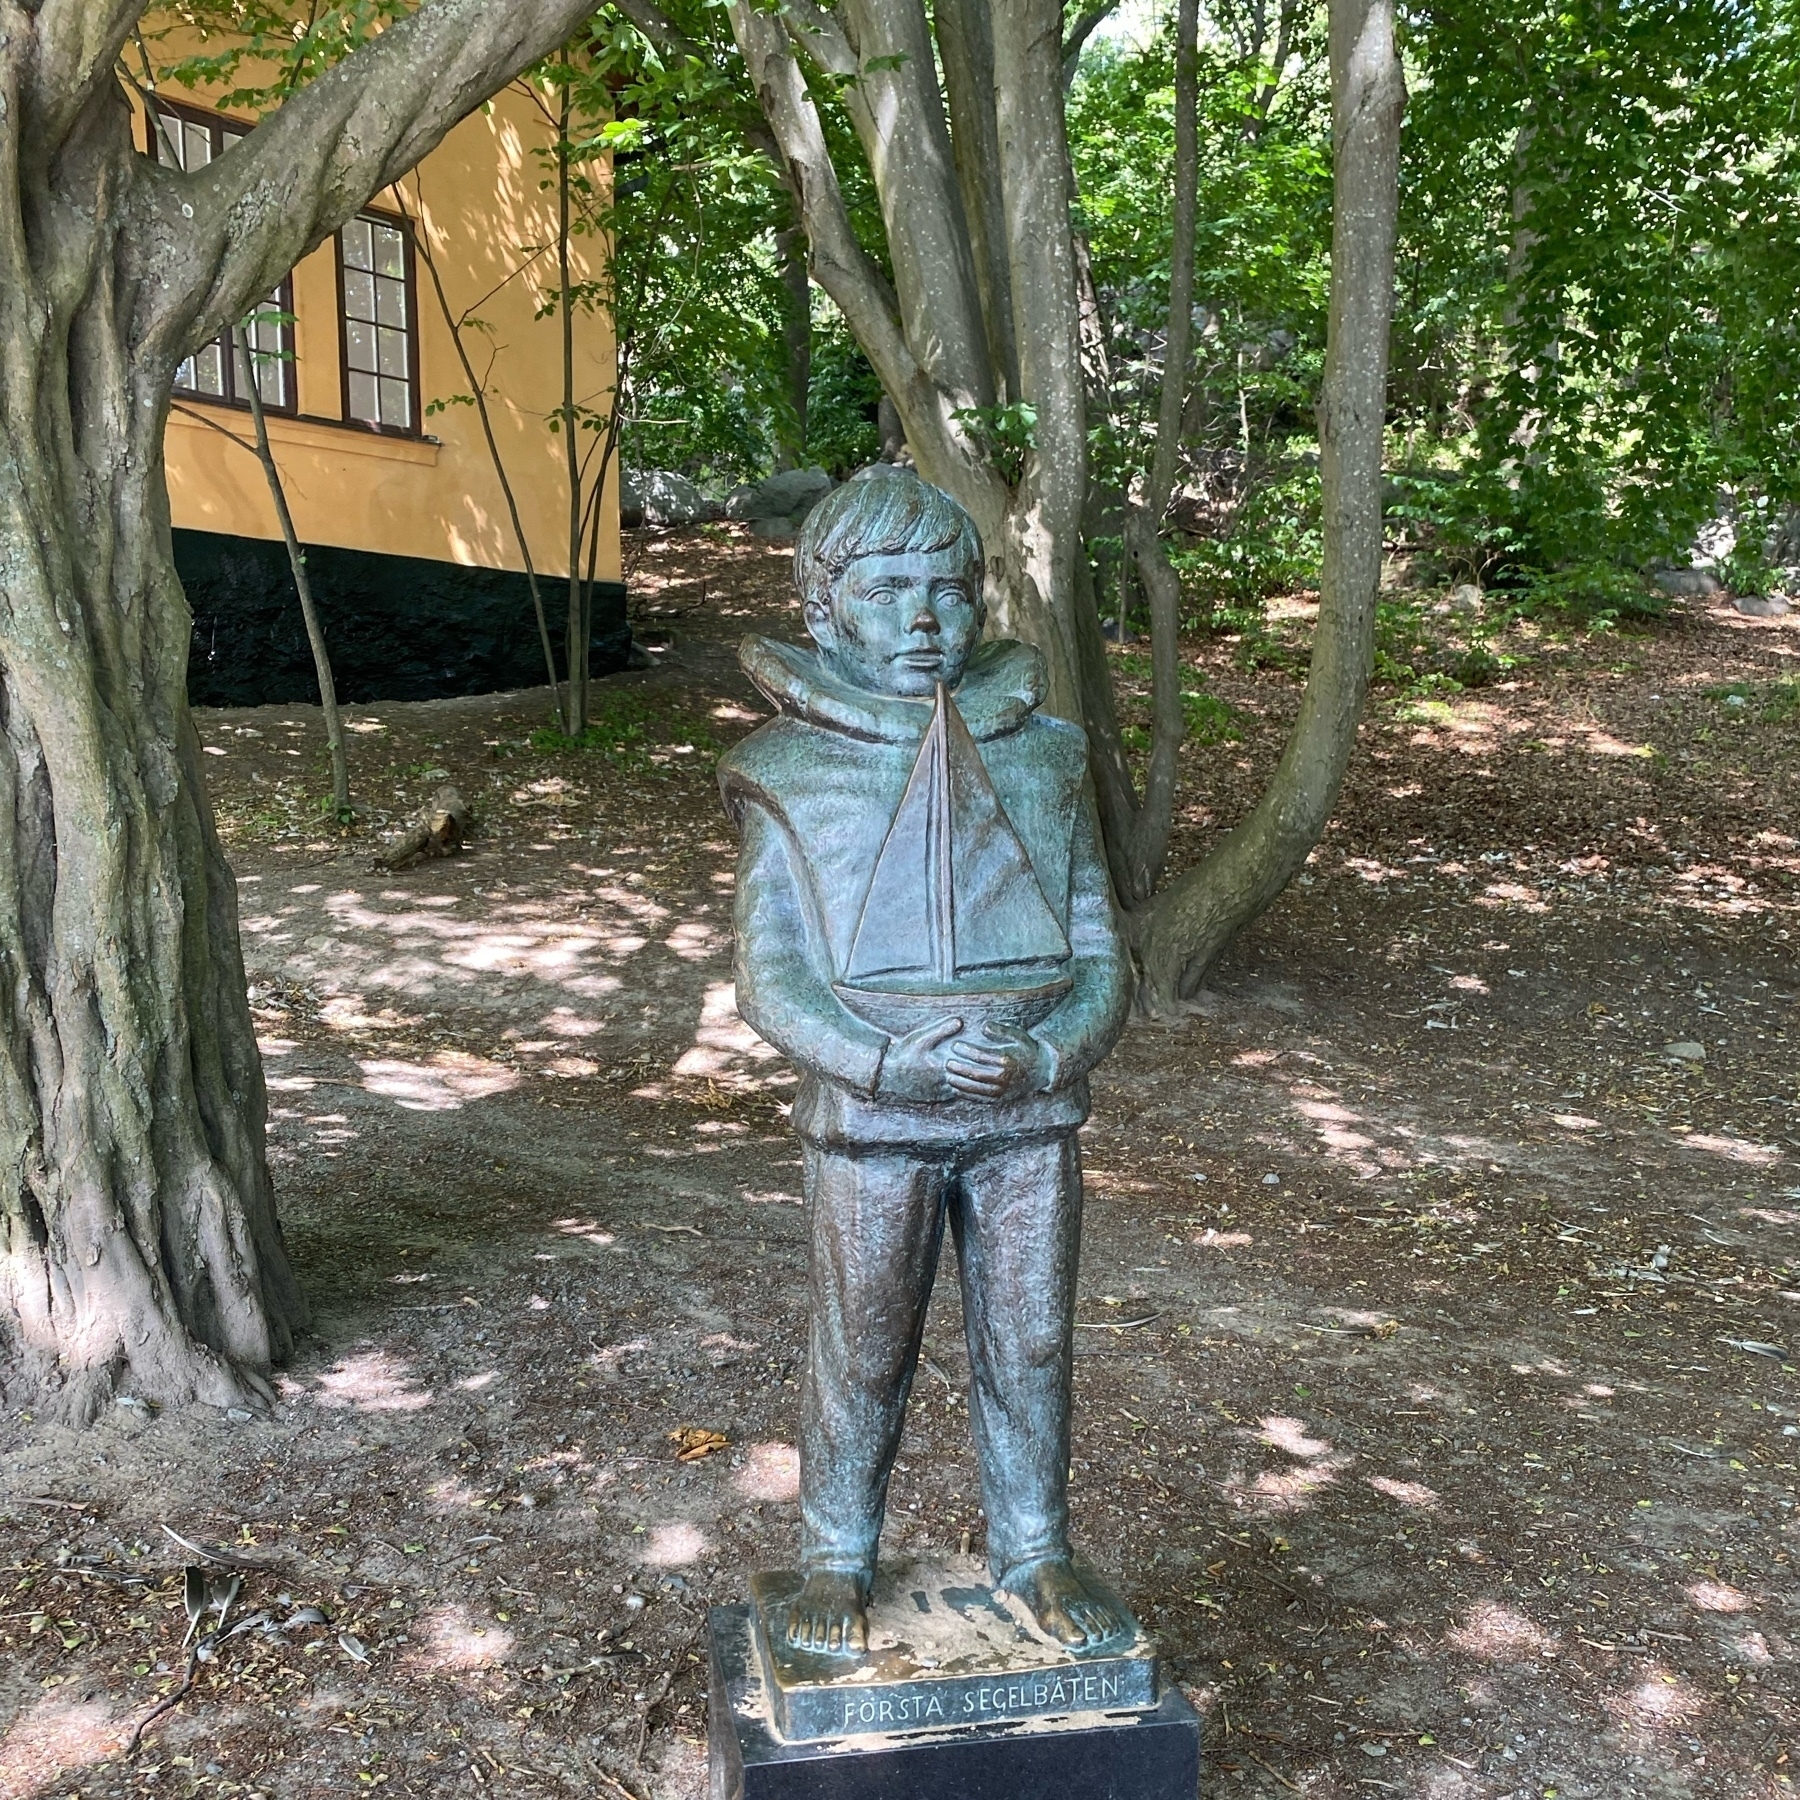 bronze sculpture in Stockholm park of a boy holding a toy boat